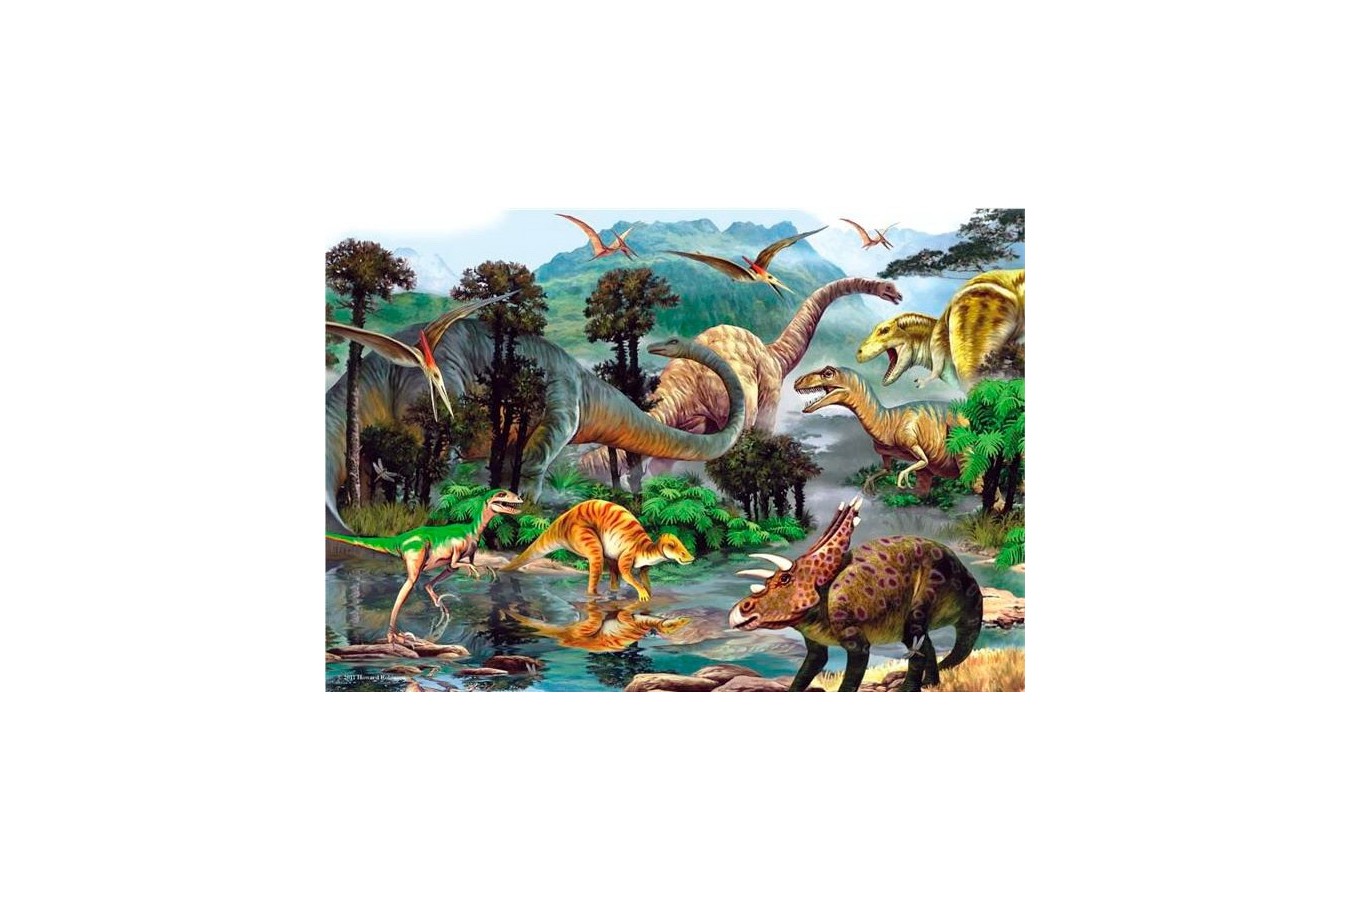 Puzzle Anatolian - Dino Valley II, 260 piese (3288)